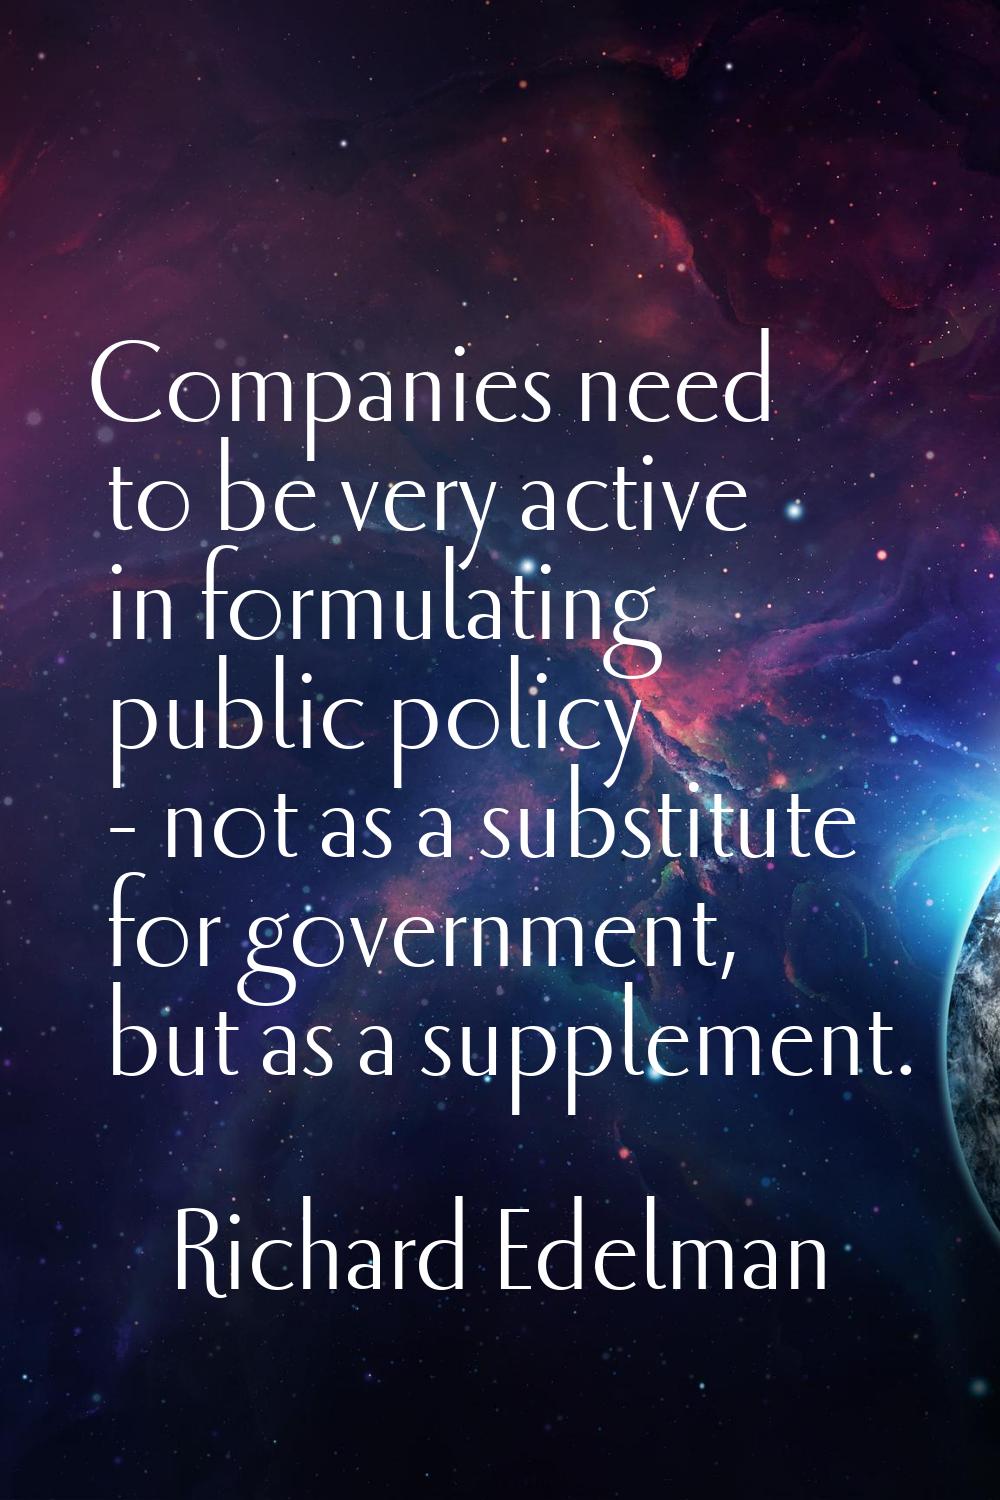 Companies need to be very active in formulating public policy - not as a substitute for government,